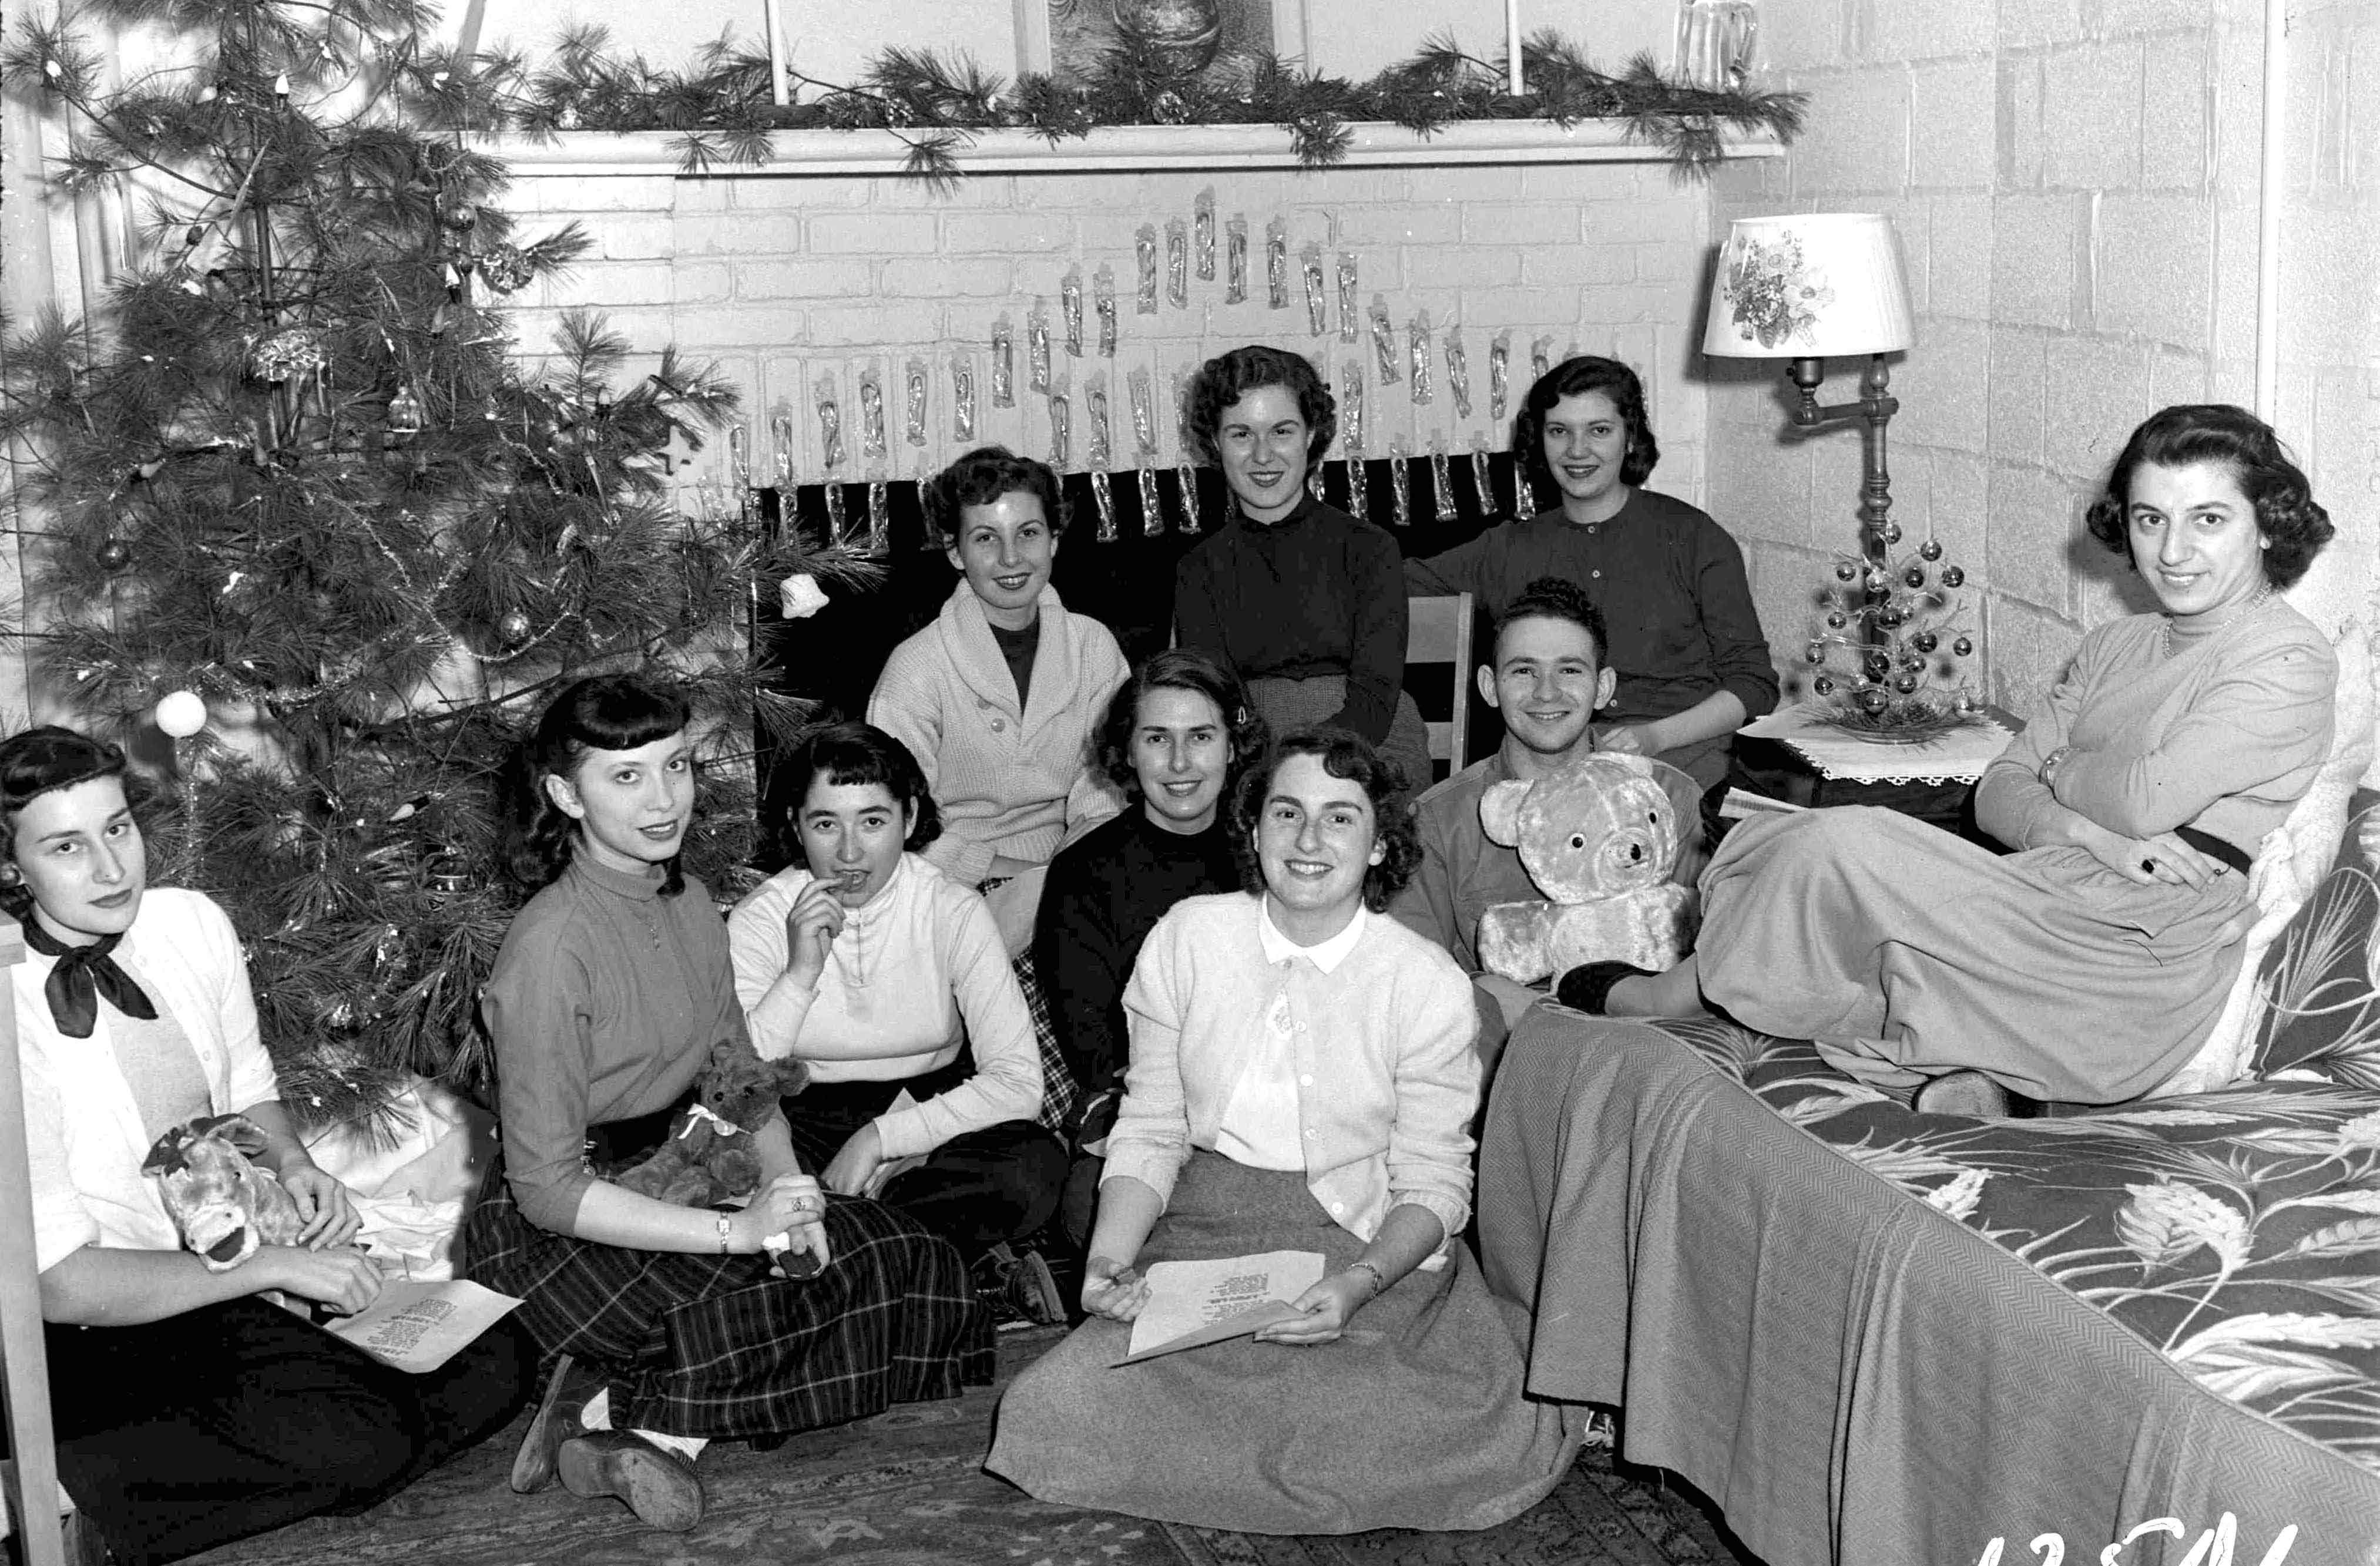 Group of female students in a living room decorated for the holidays.